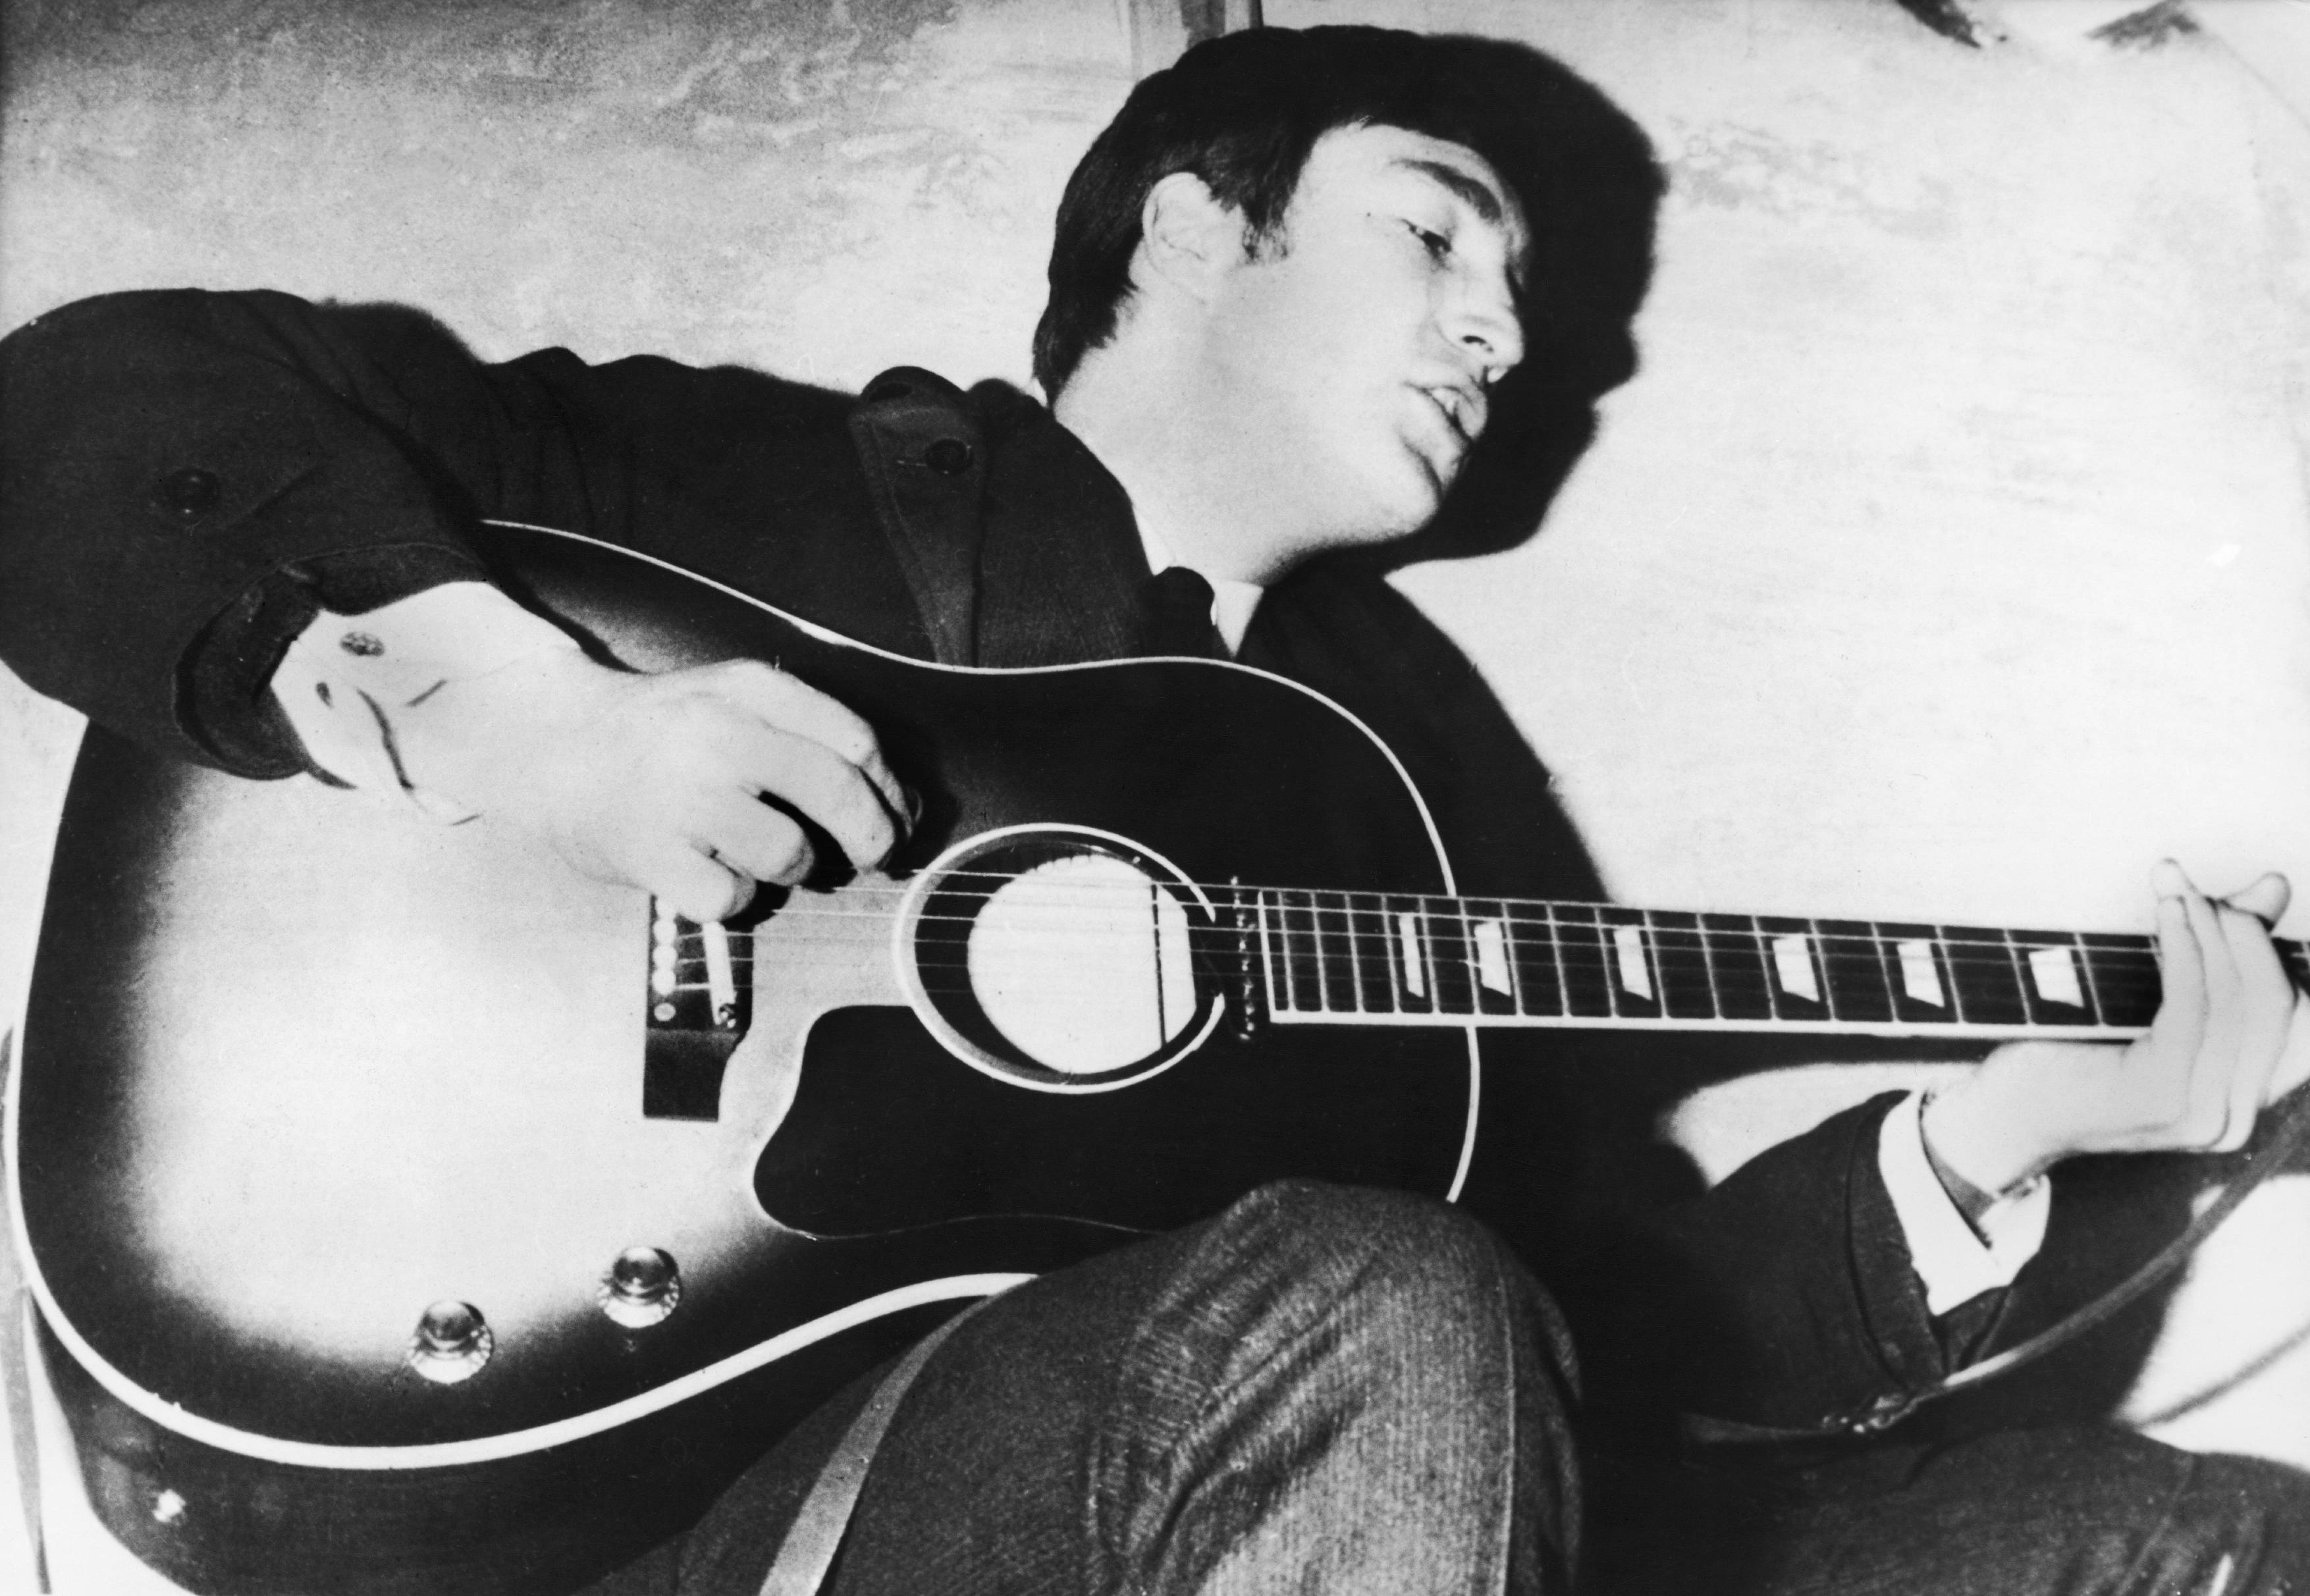 John Lennon playing his guitar in black and white, sometime around 1960.